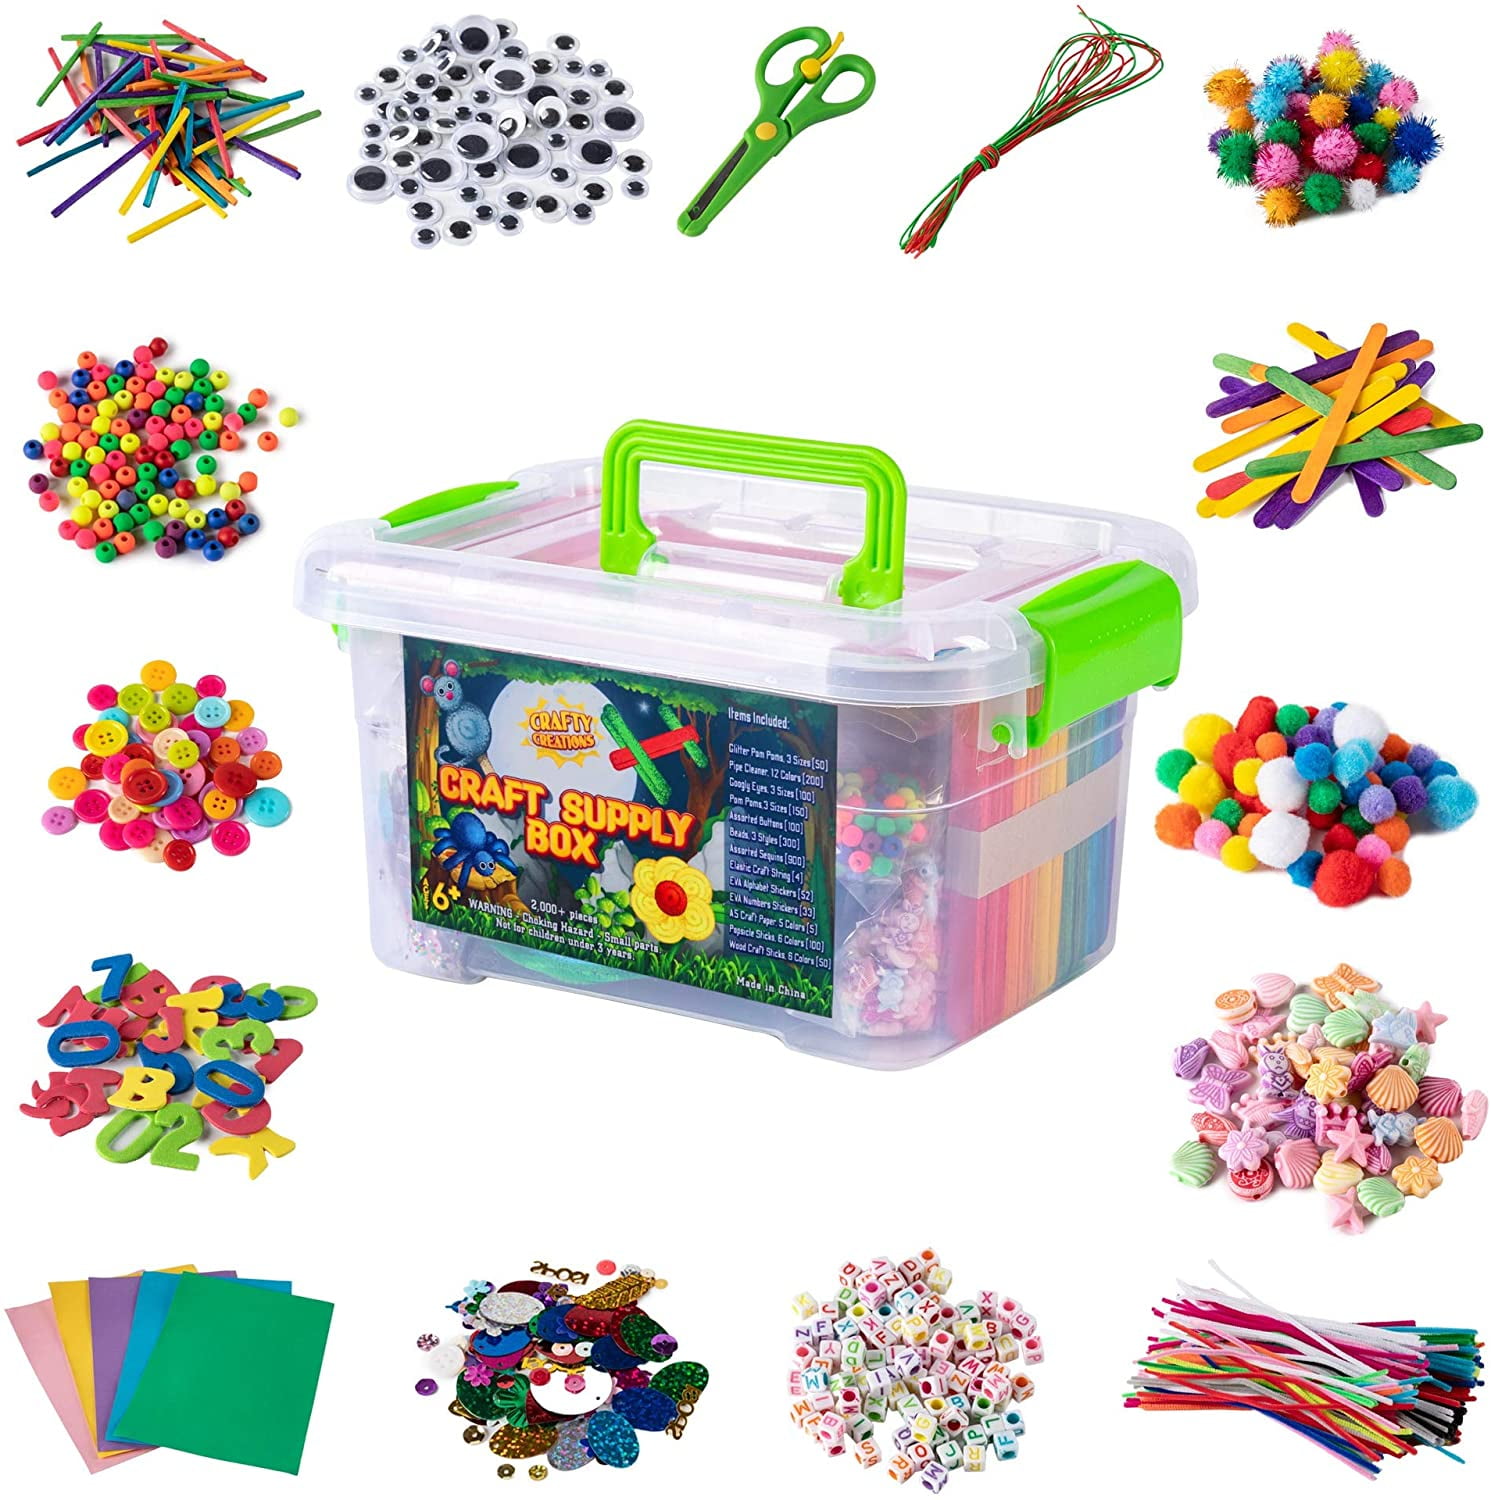 Bells Pipe Cleaners Over 2000Pcs DIY Creative Craft Box Include Pom Poms Popsicle Sticks Googly Eyes N&T NIETING Art Craft Supplies 